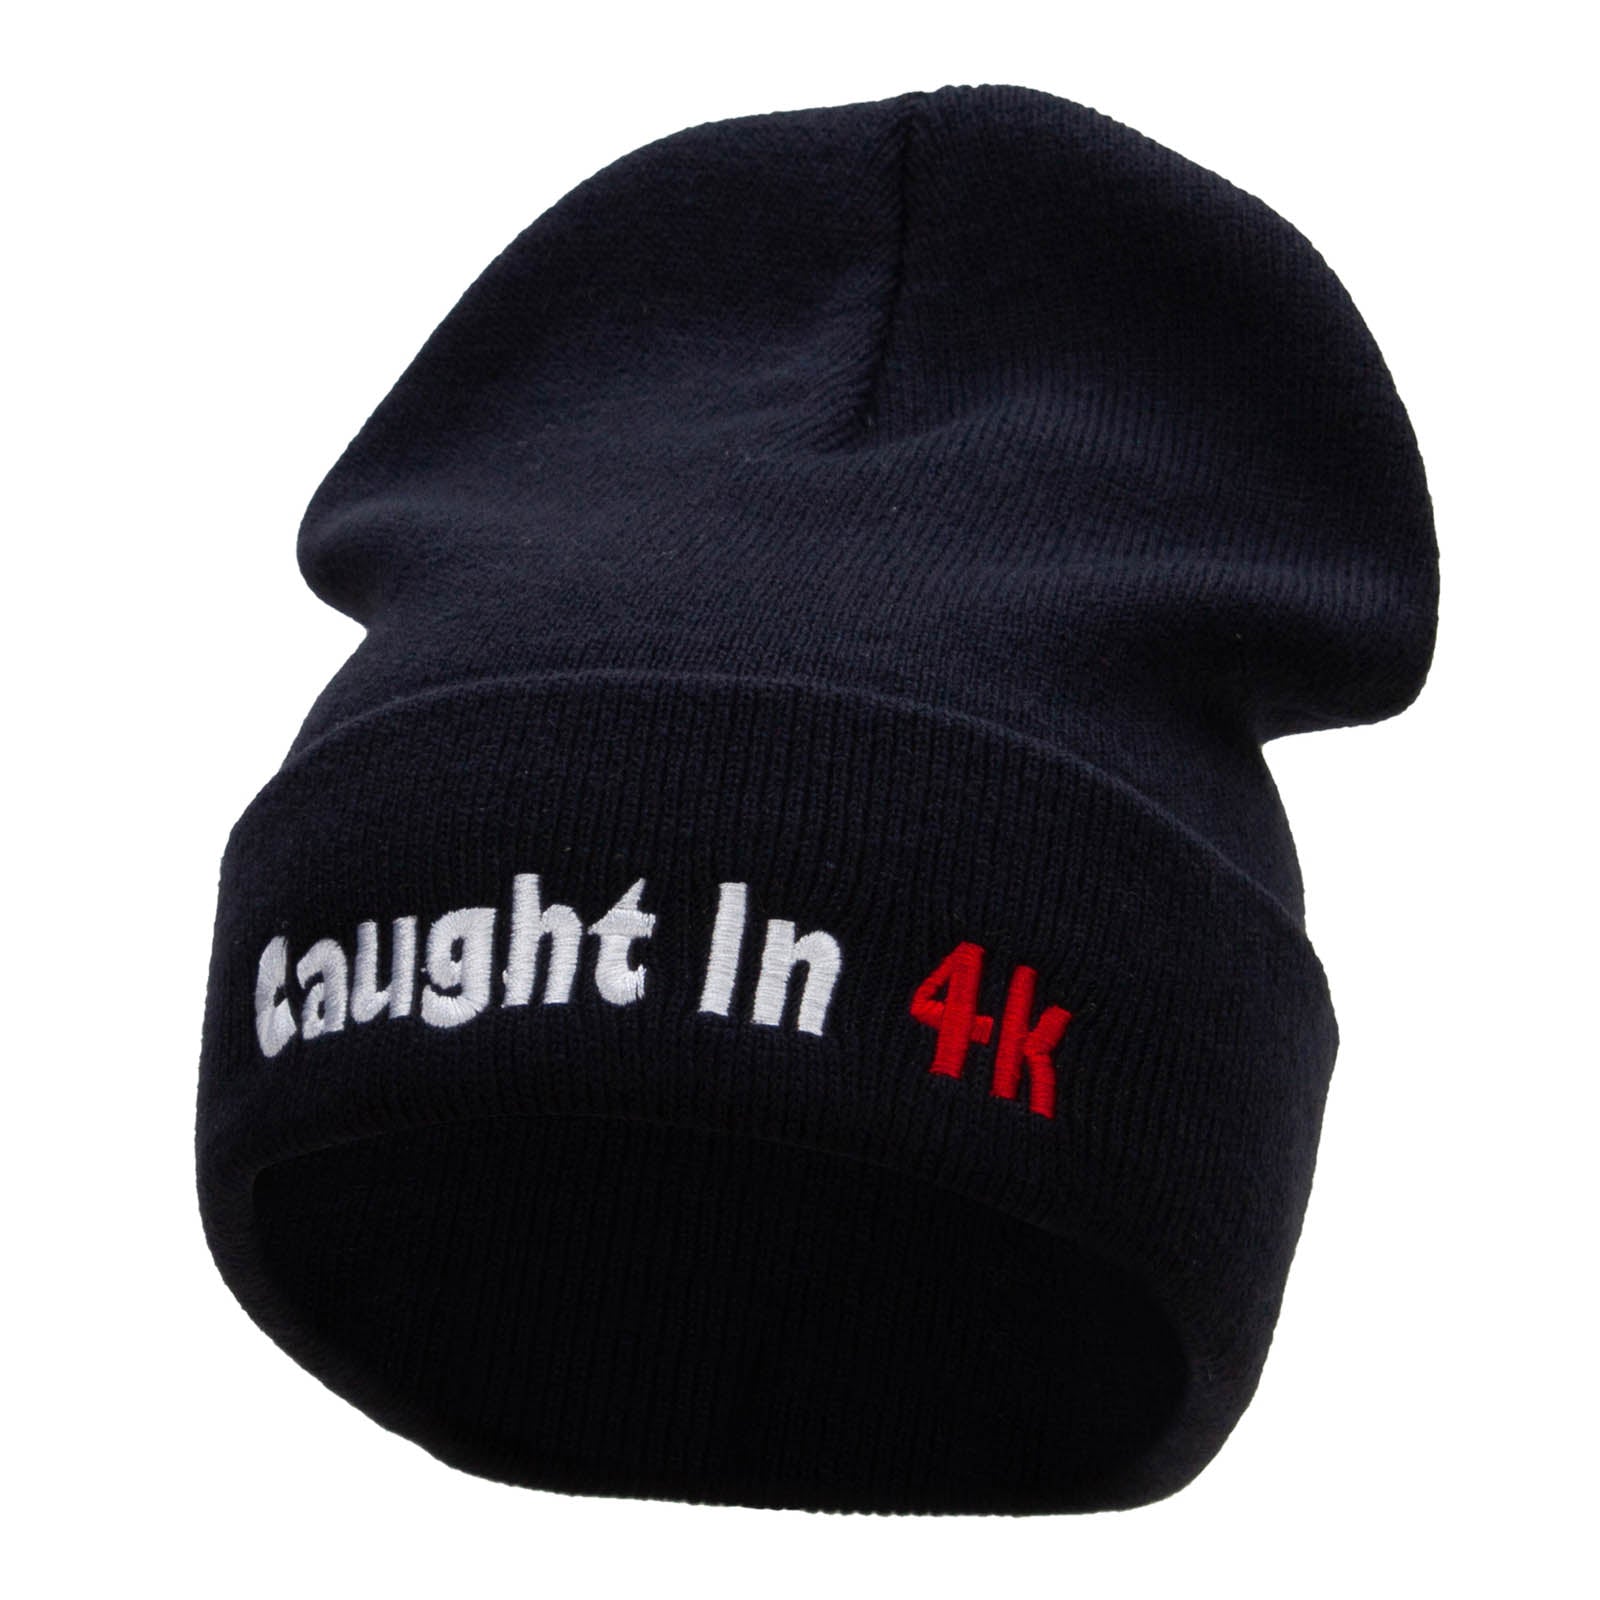 Caught in 4k Embroidered 12 Inch Long Knitted Beanie - Black OSFM